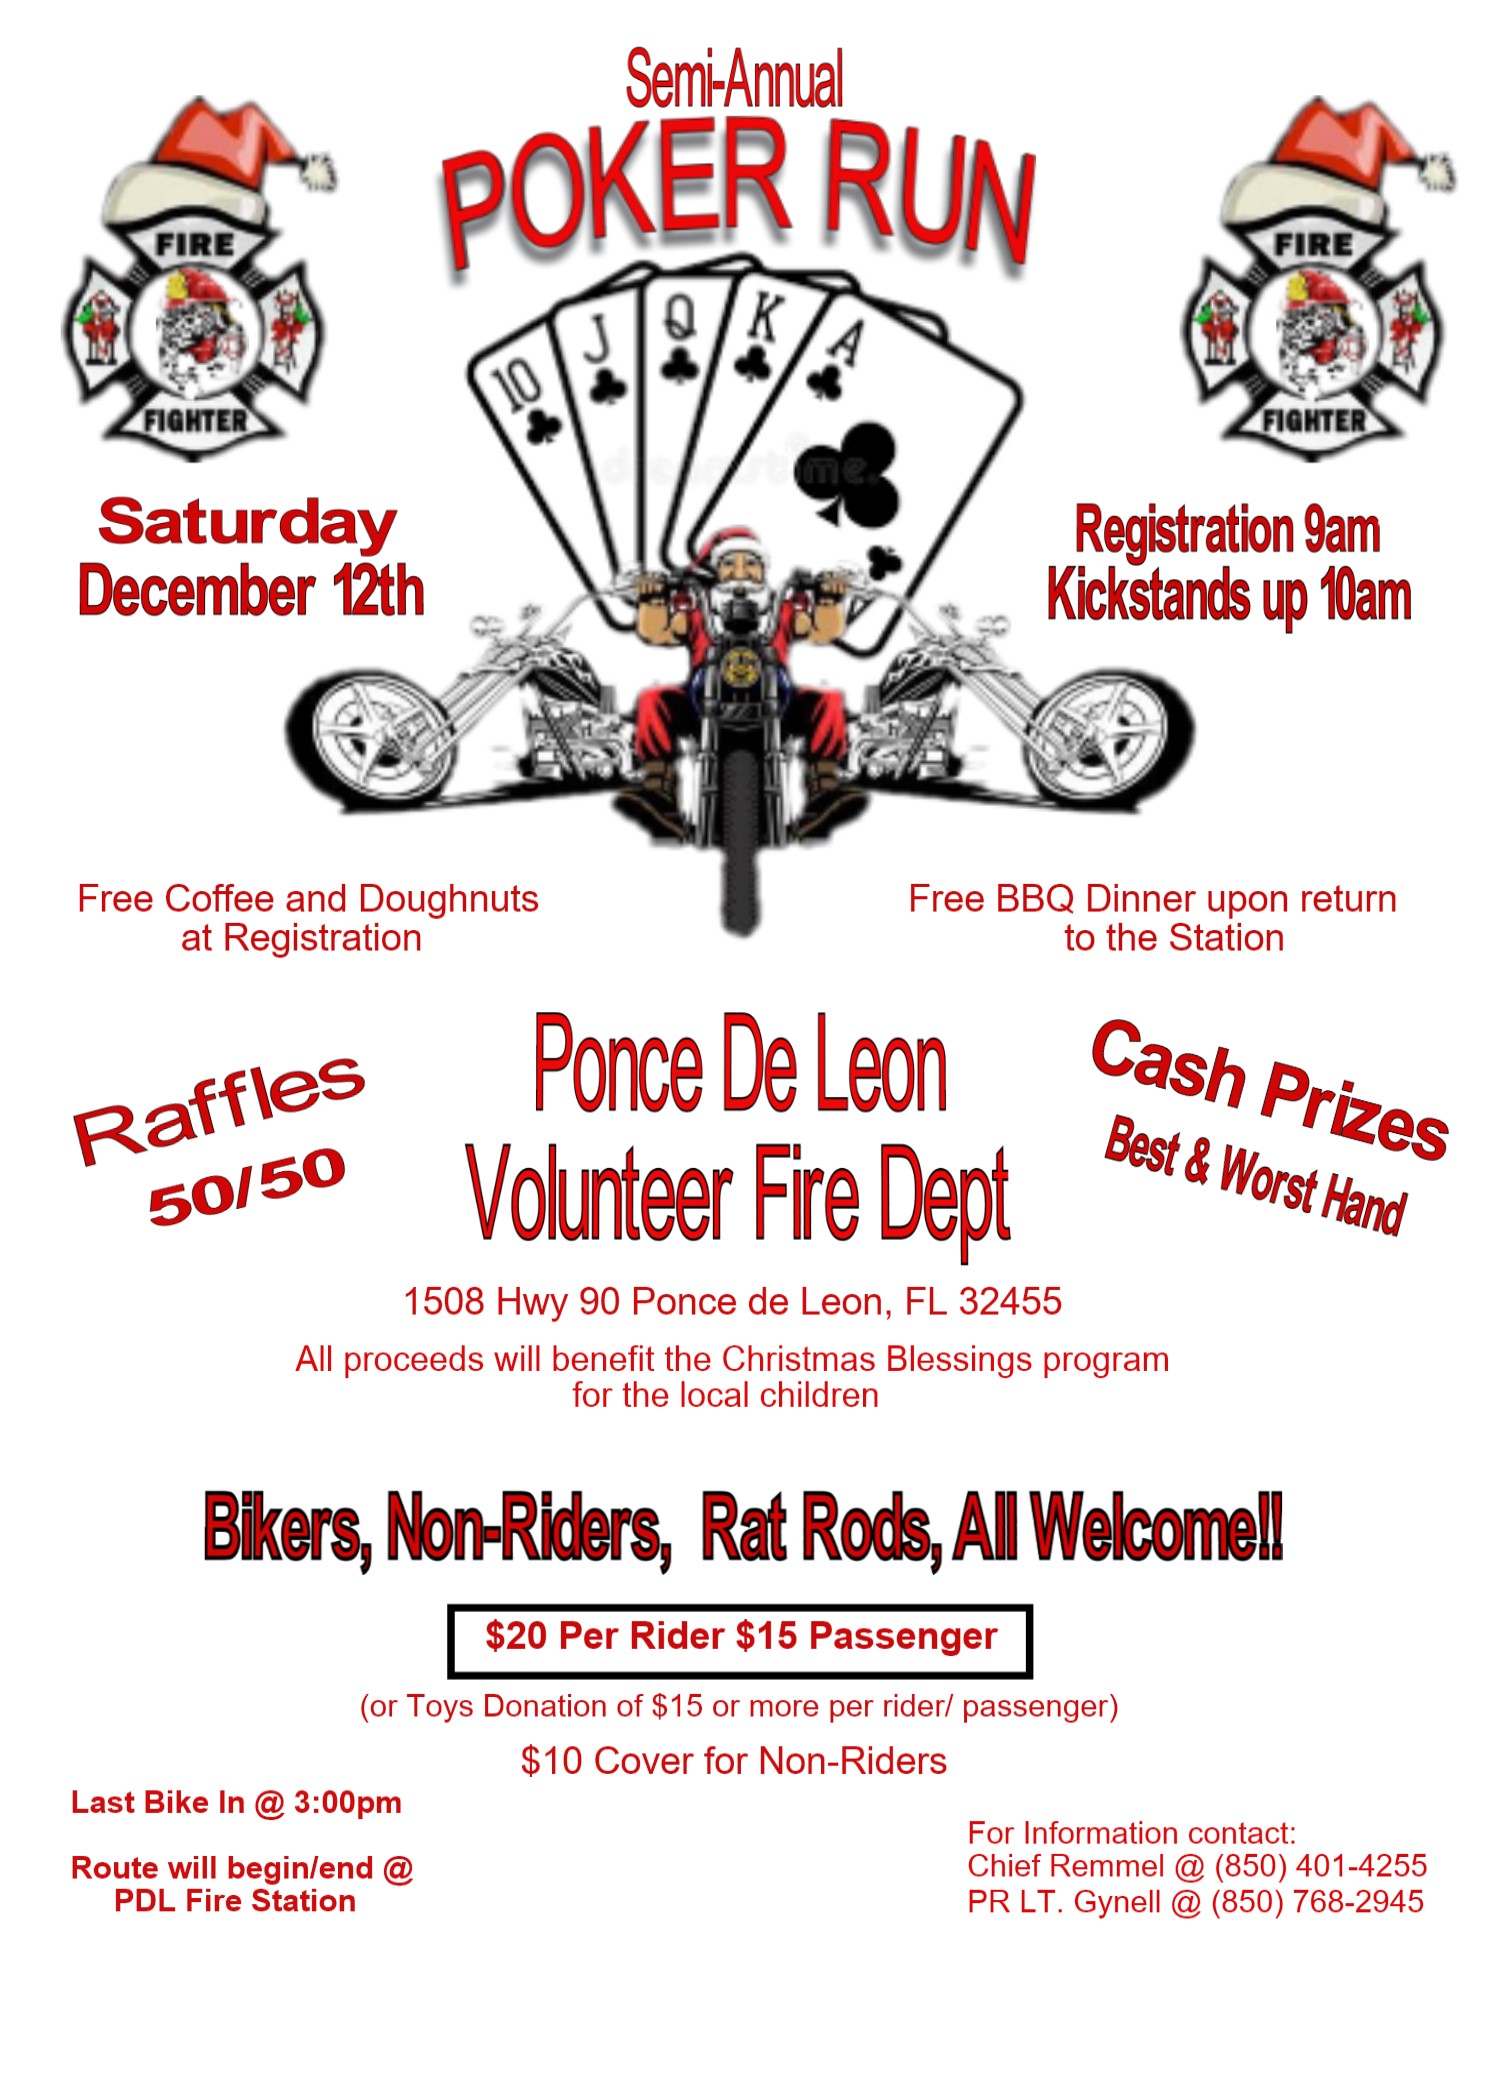 PDL Fire Dept POKER RUN Born To Ride Motorcycle Magazine Motorcycle